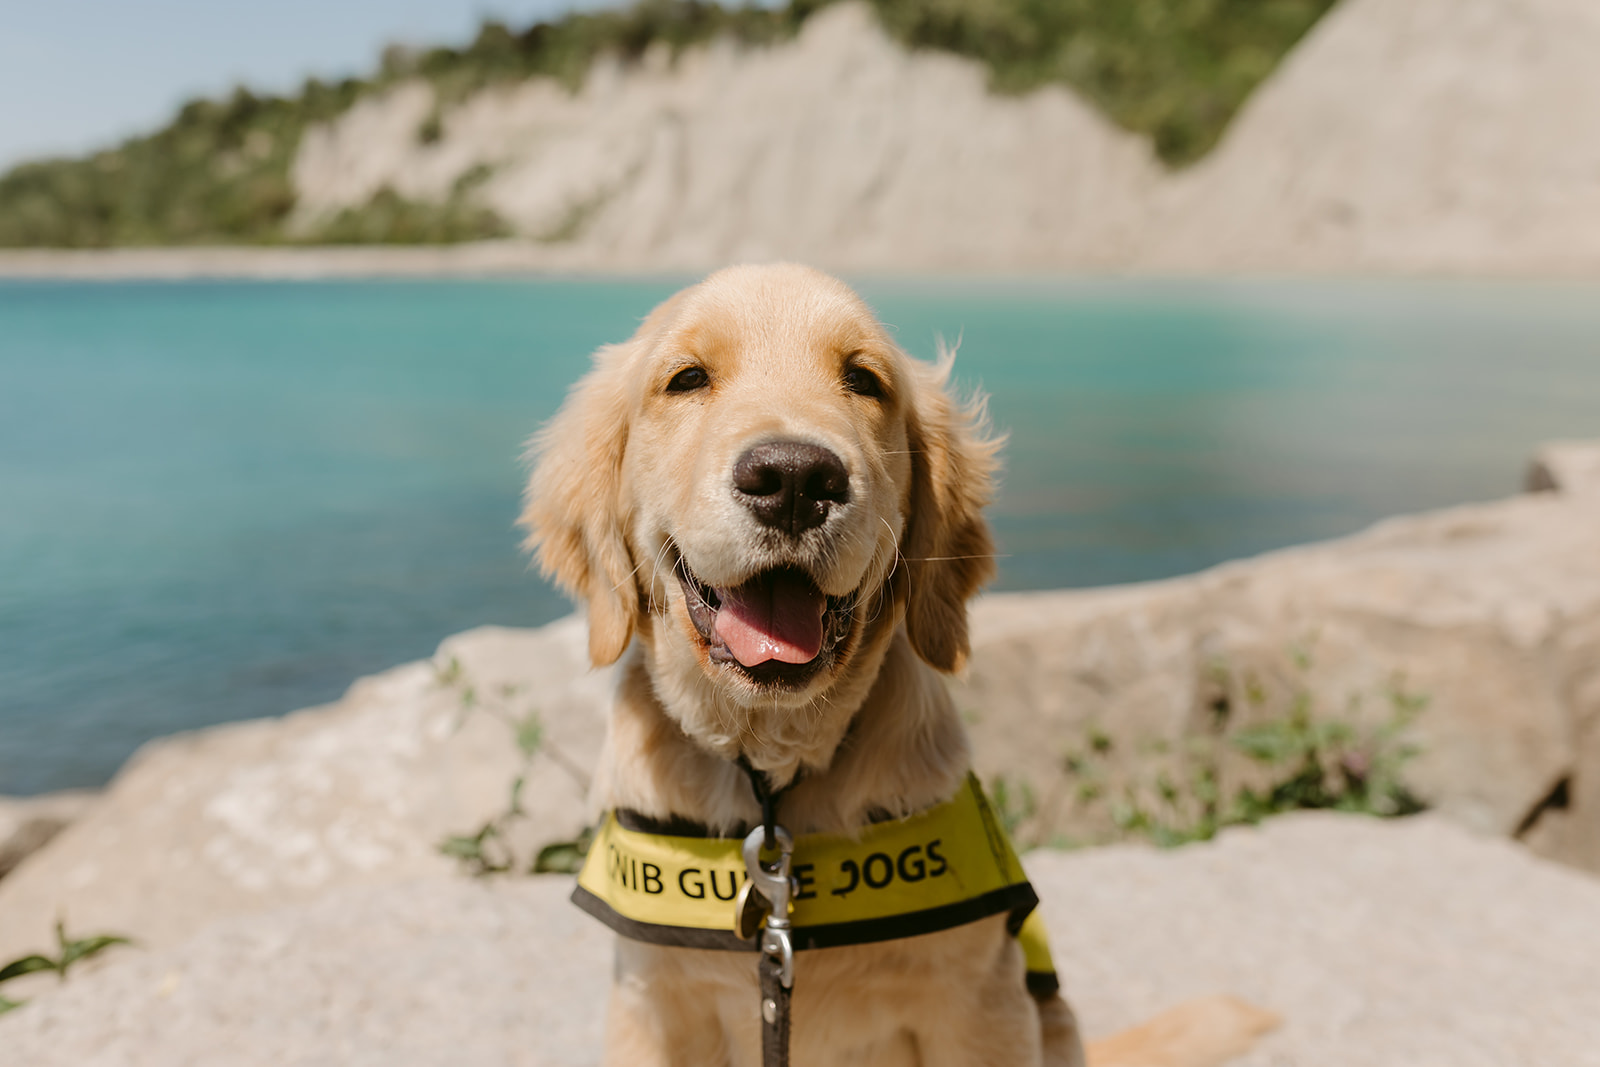 A future CNIB Guide Dog, golden retriever puppy staring at the camera on a warm day